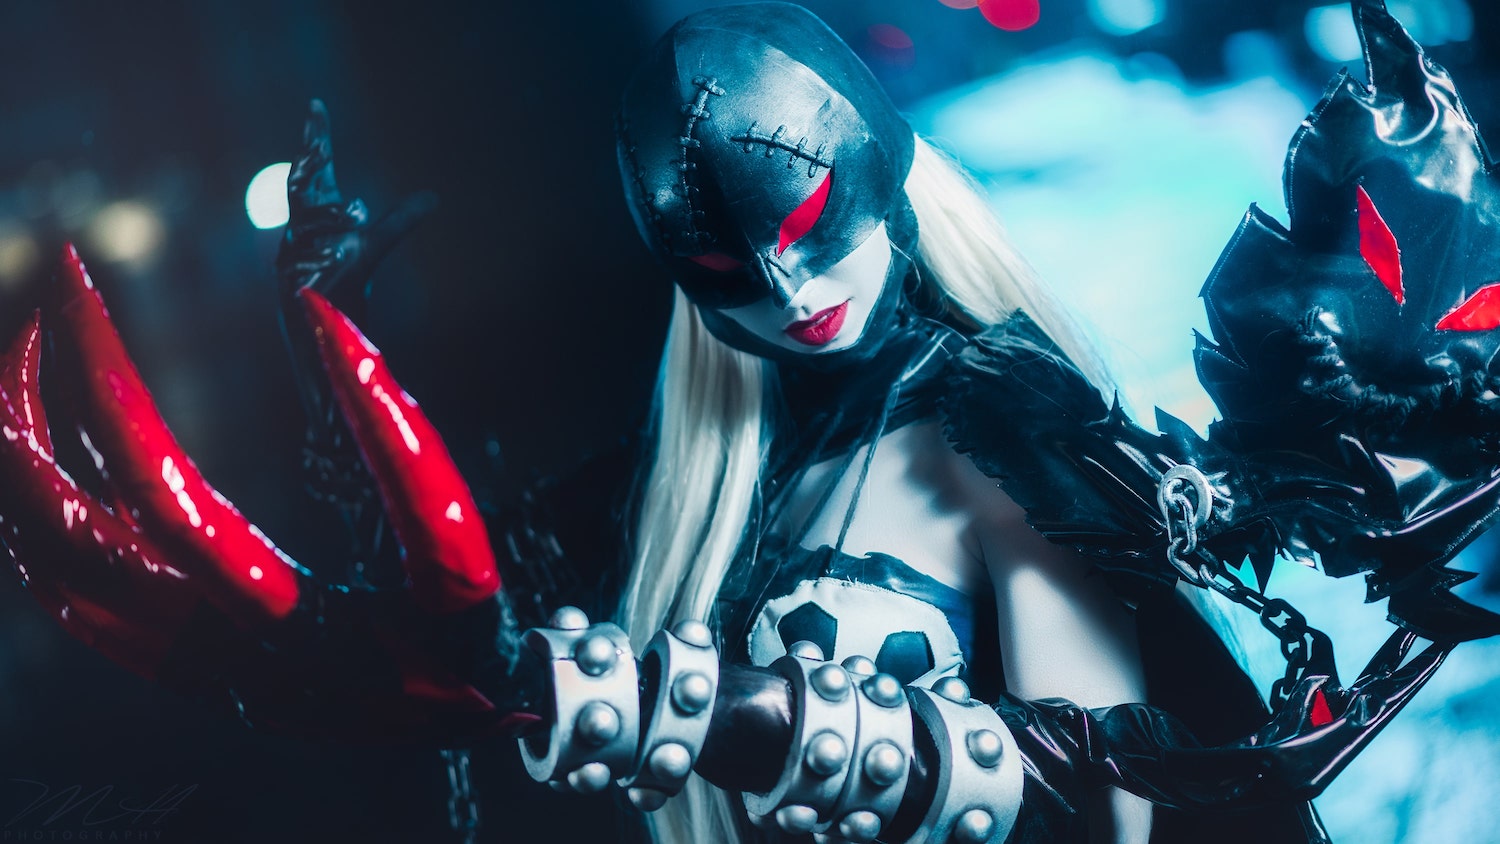 Interview with New York native, cosplayer, and Final Fantasy addict Livicole